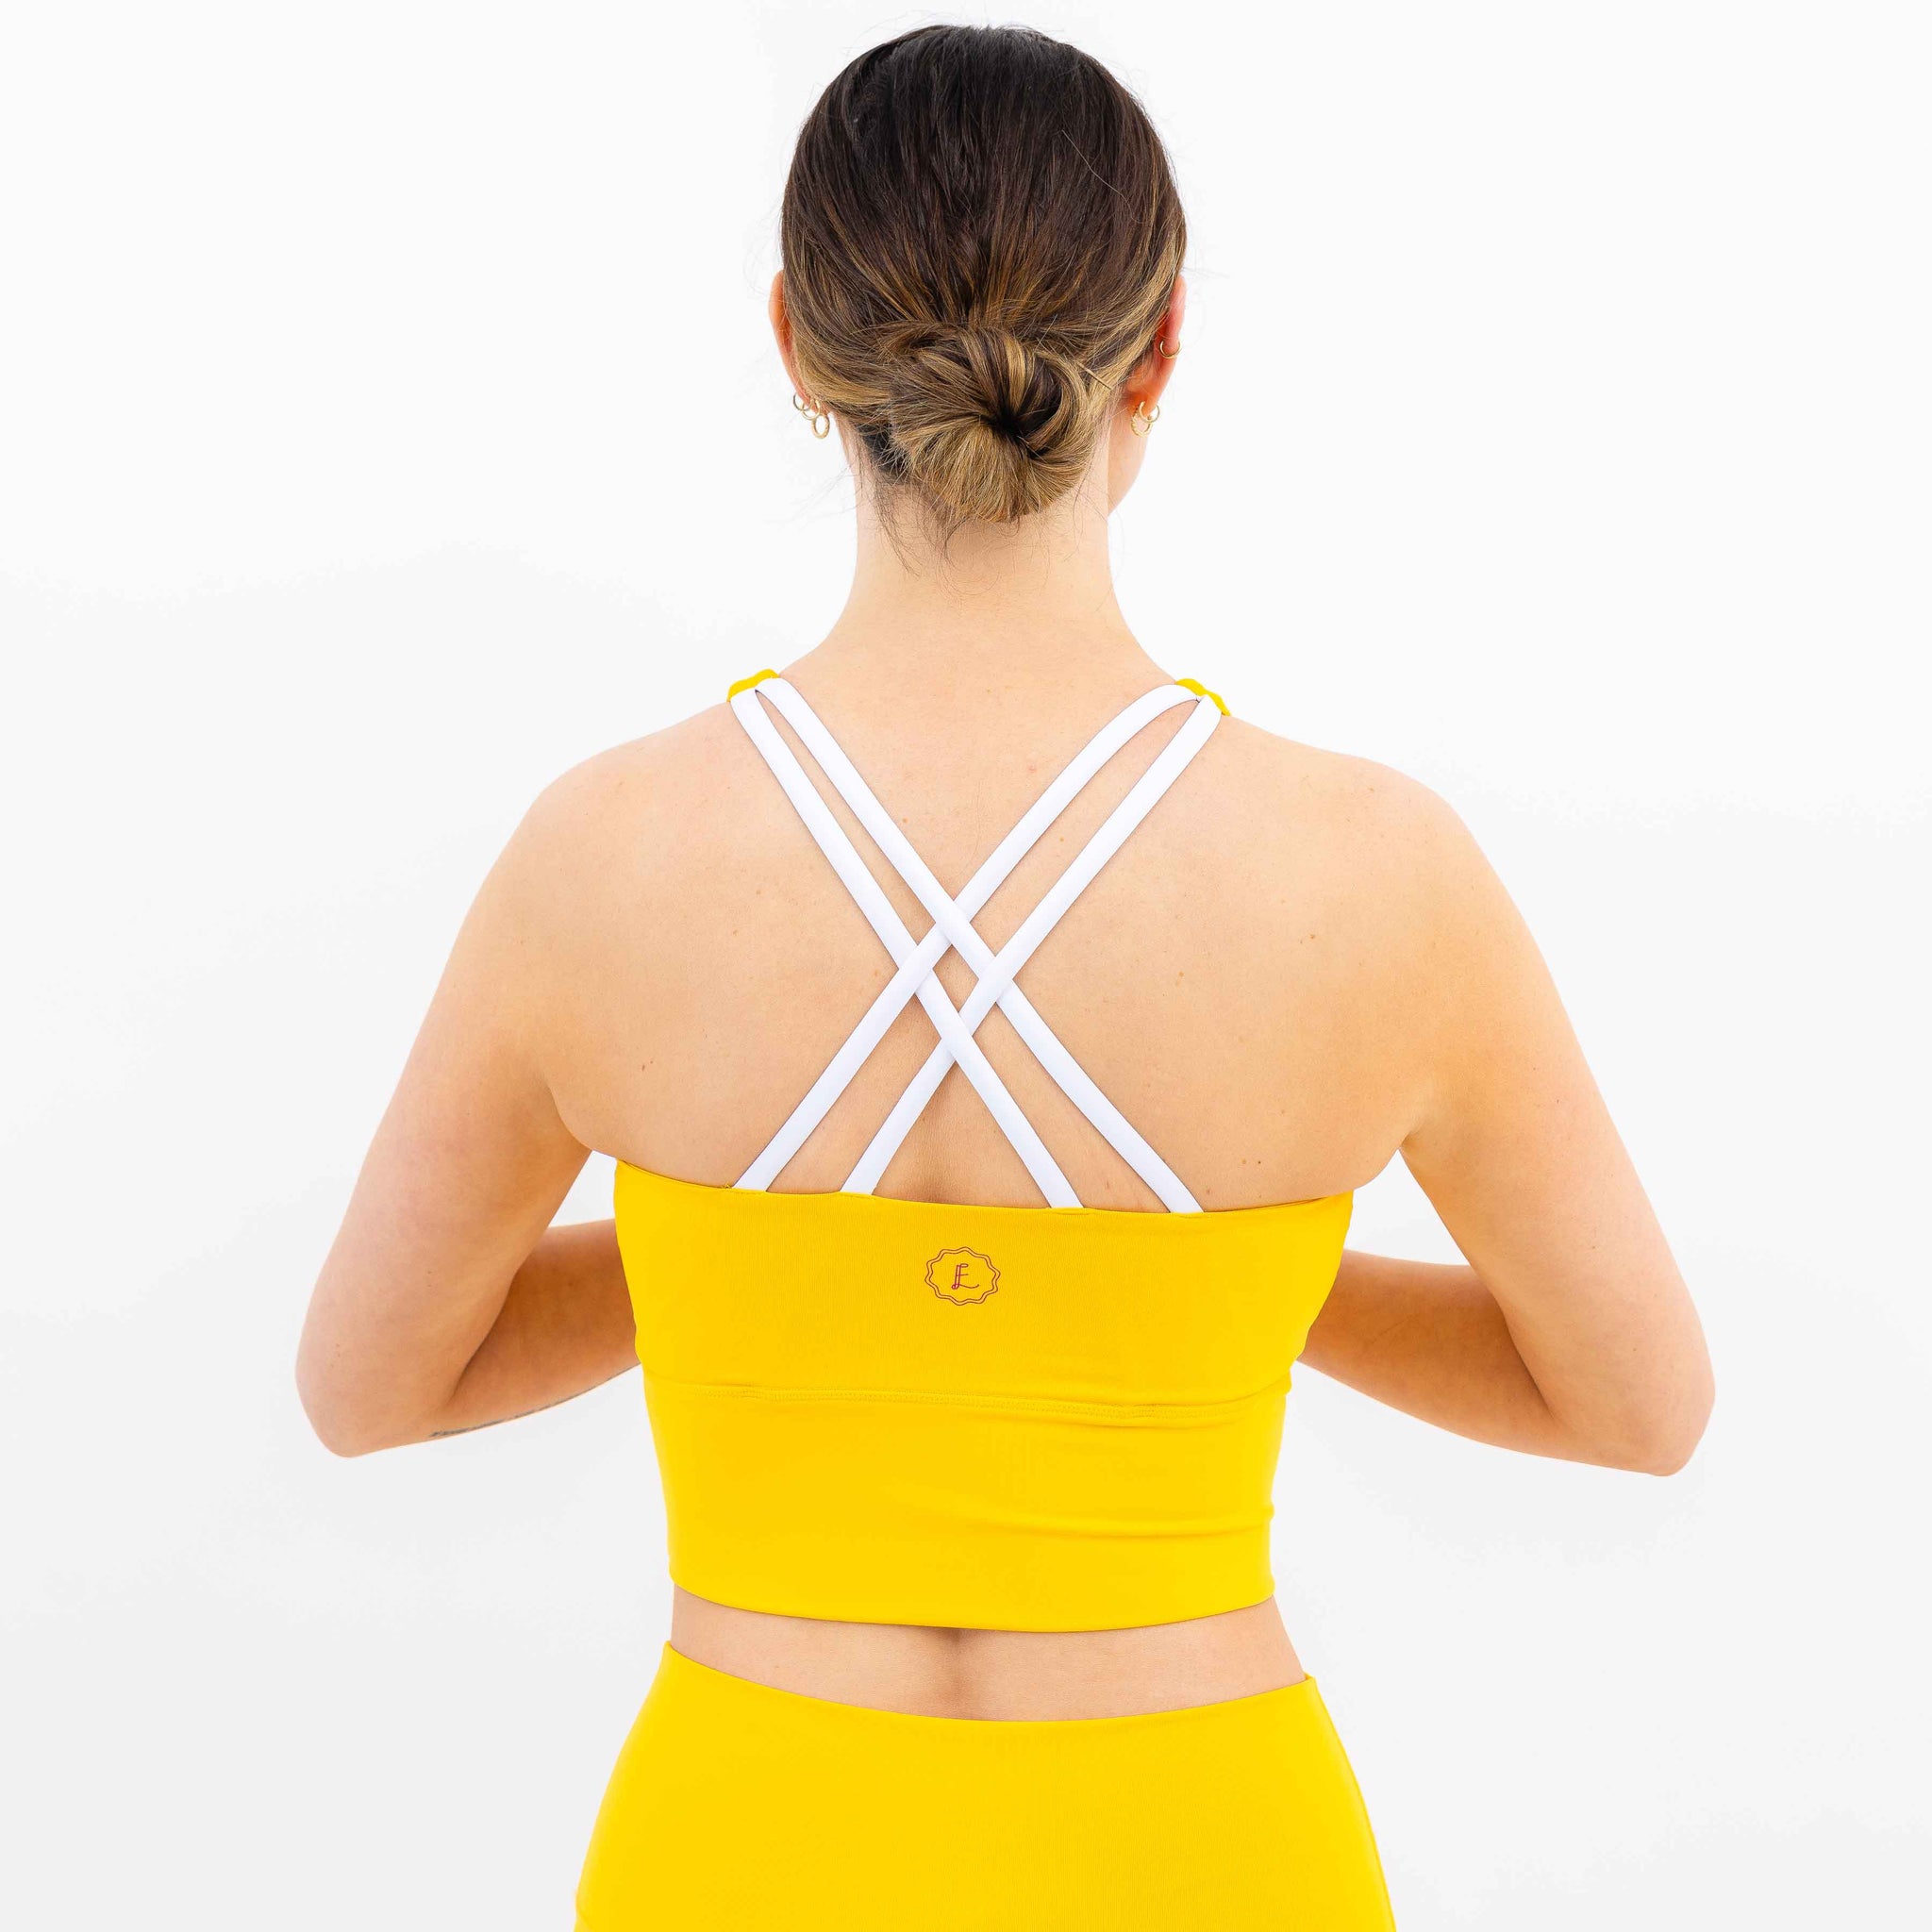 The back of The Happily Eva After Collection Acadia Top